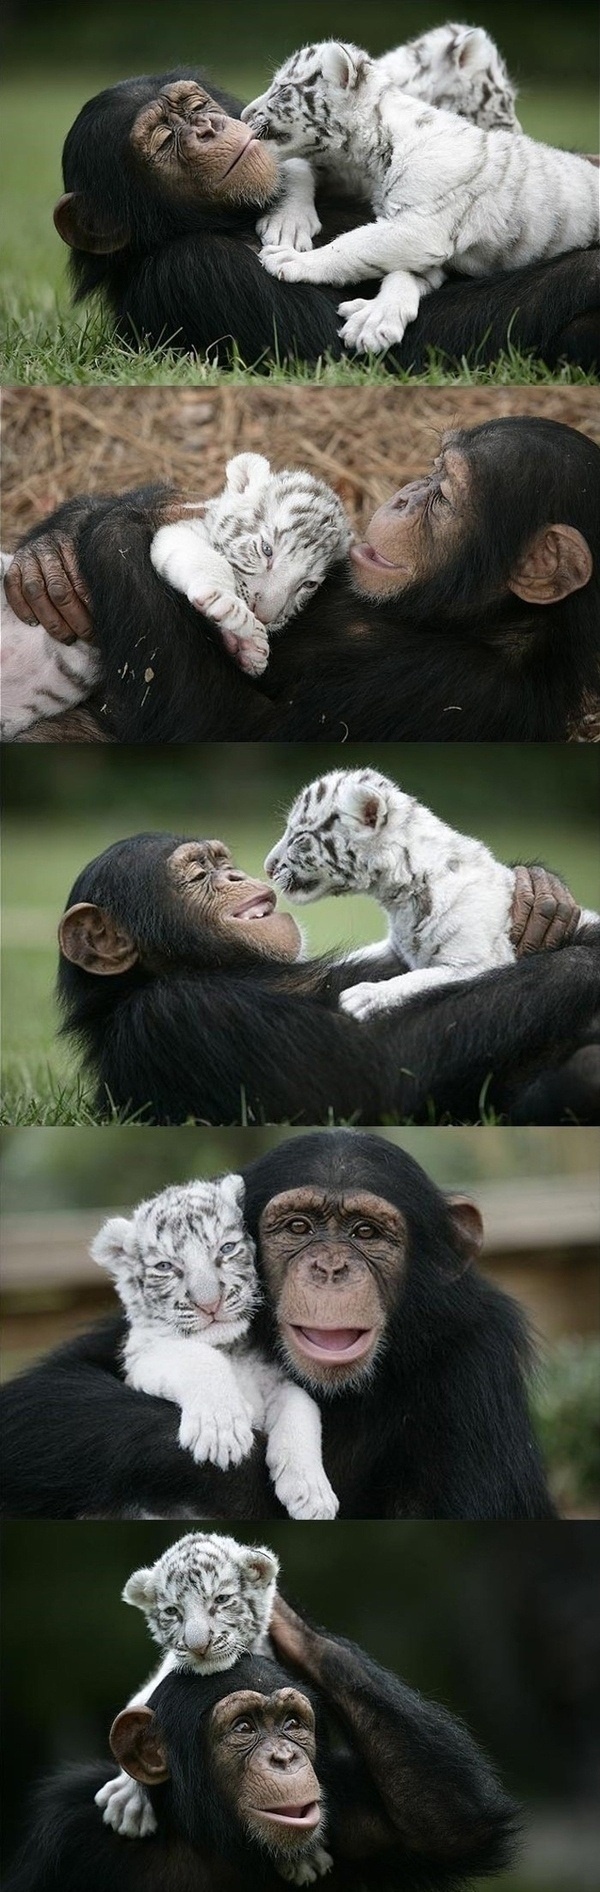 At the TIGERS institute in South Carolina, a chimp raises tiger cubs after they were separated from their mother.